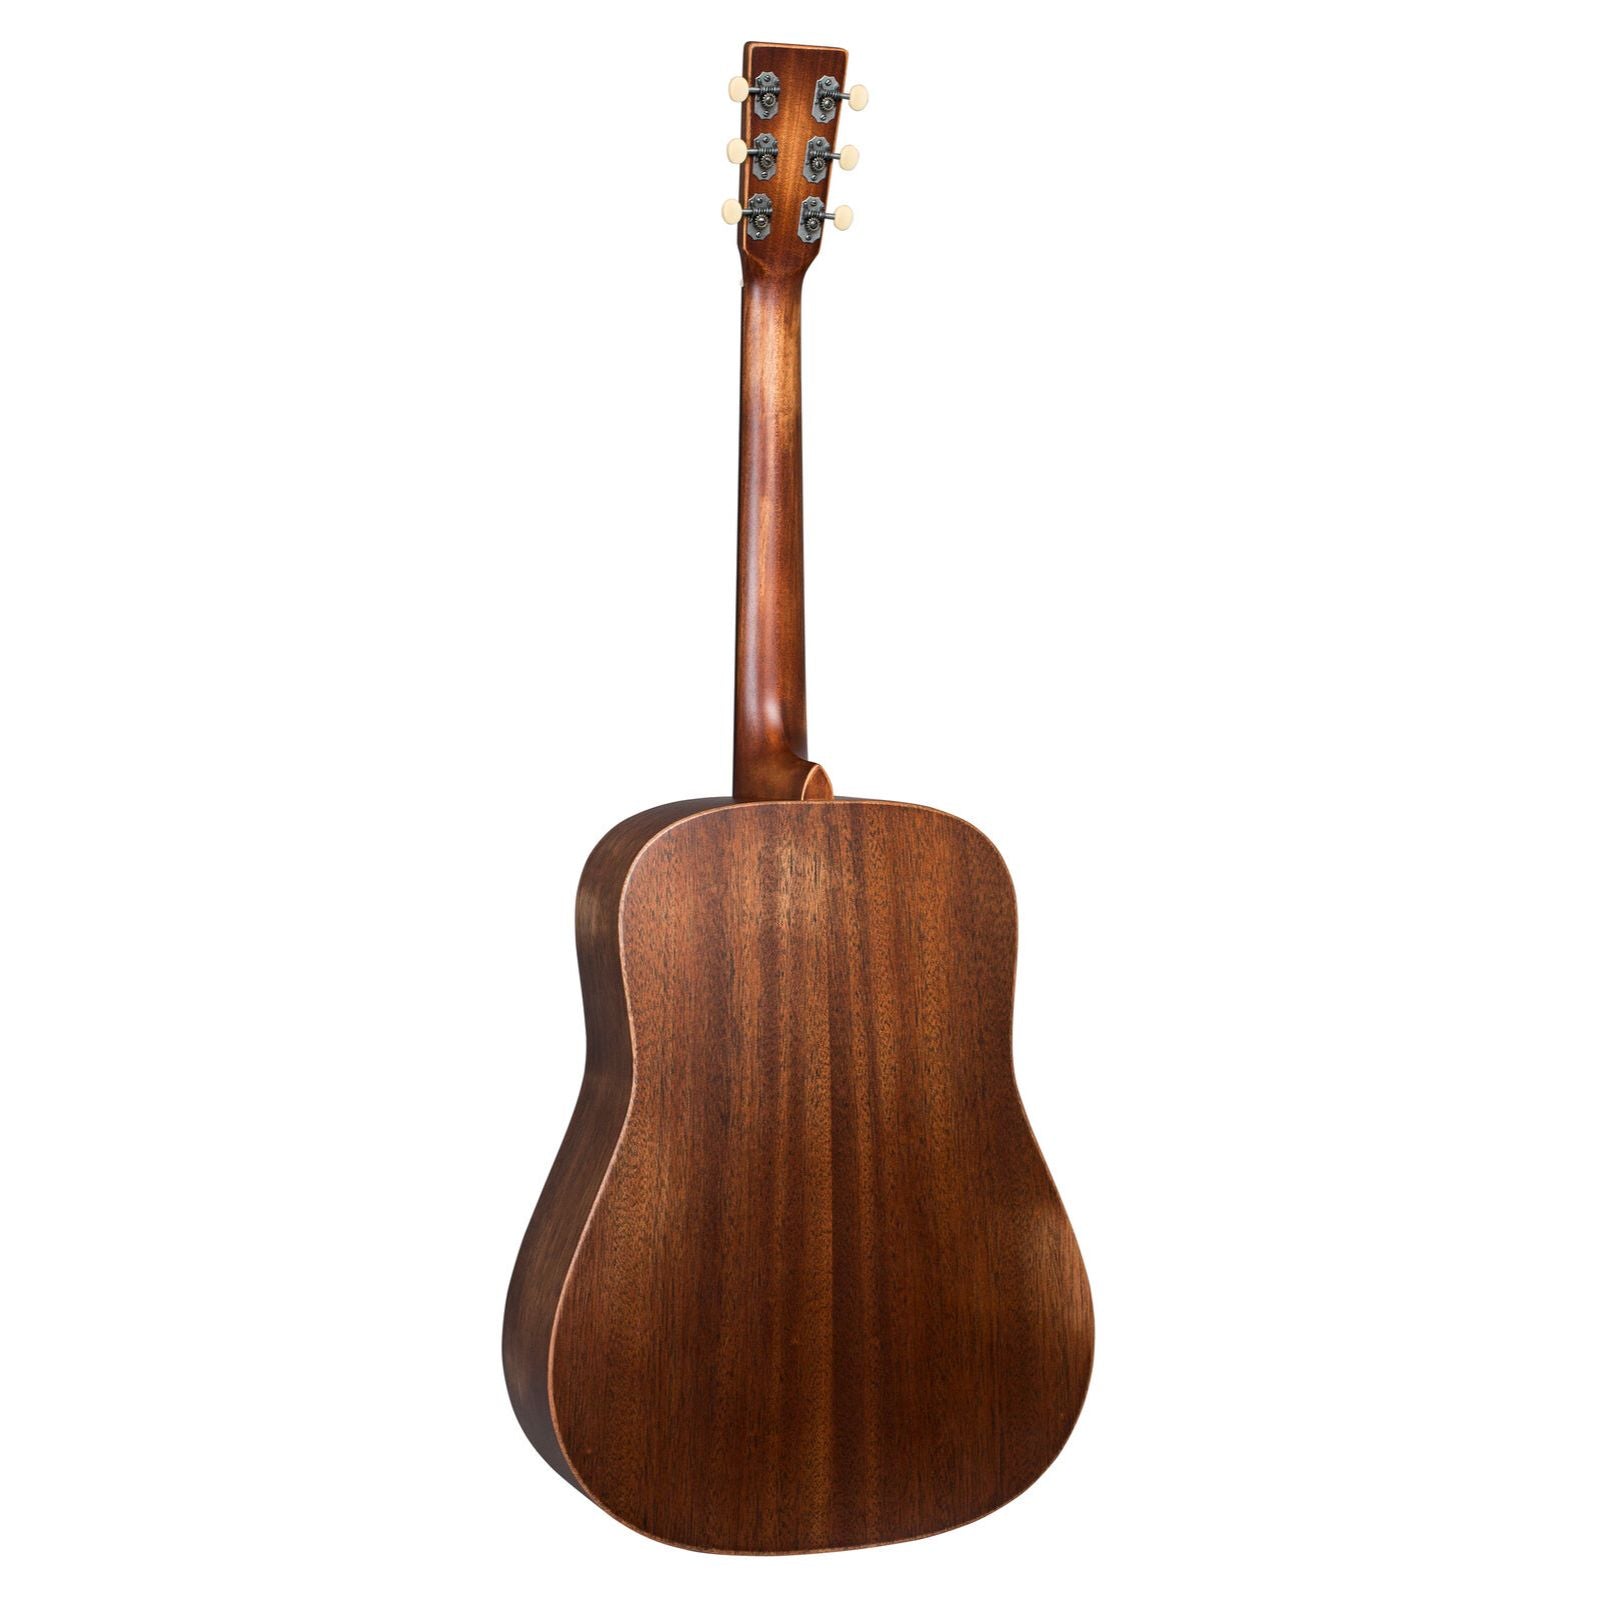 Martin D-15M StreetMaster® Acoustic Guitar